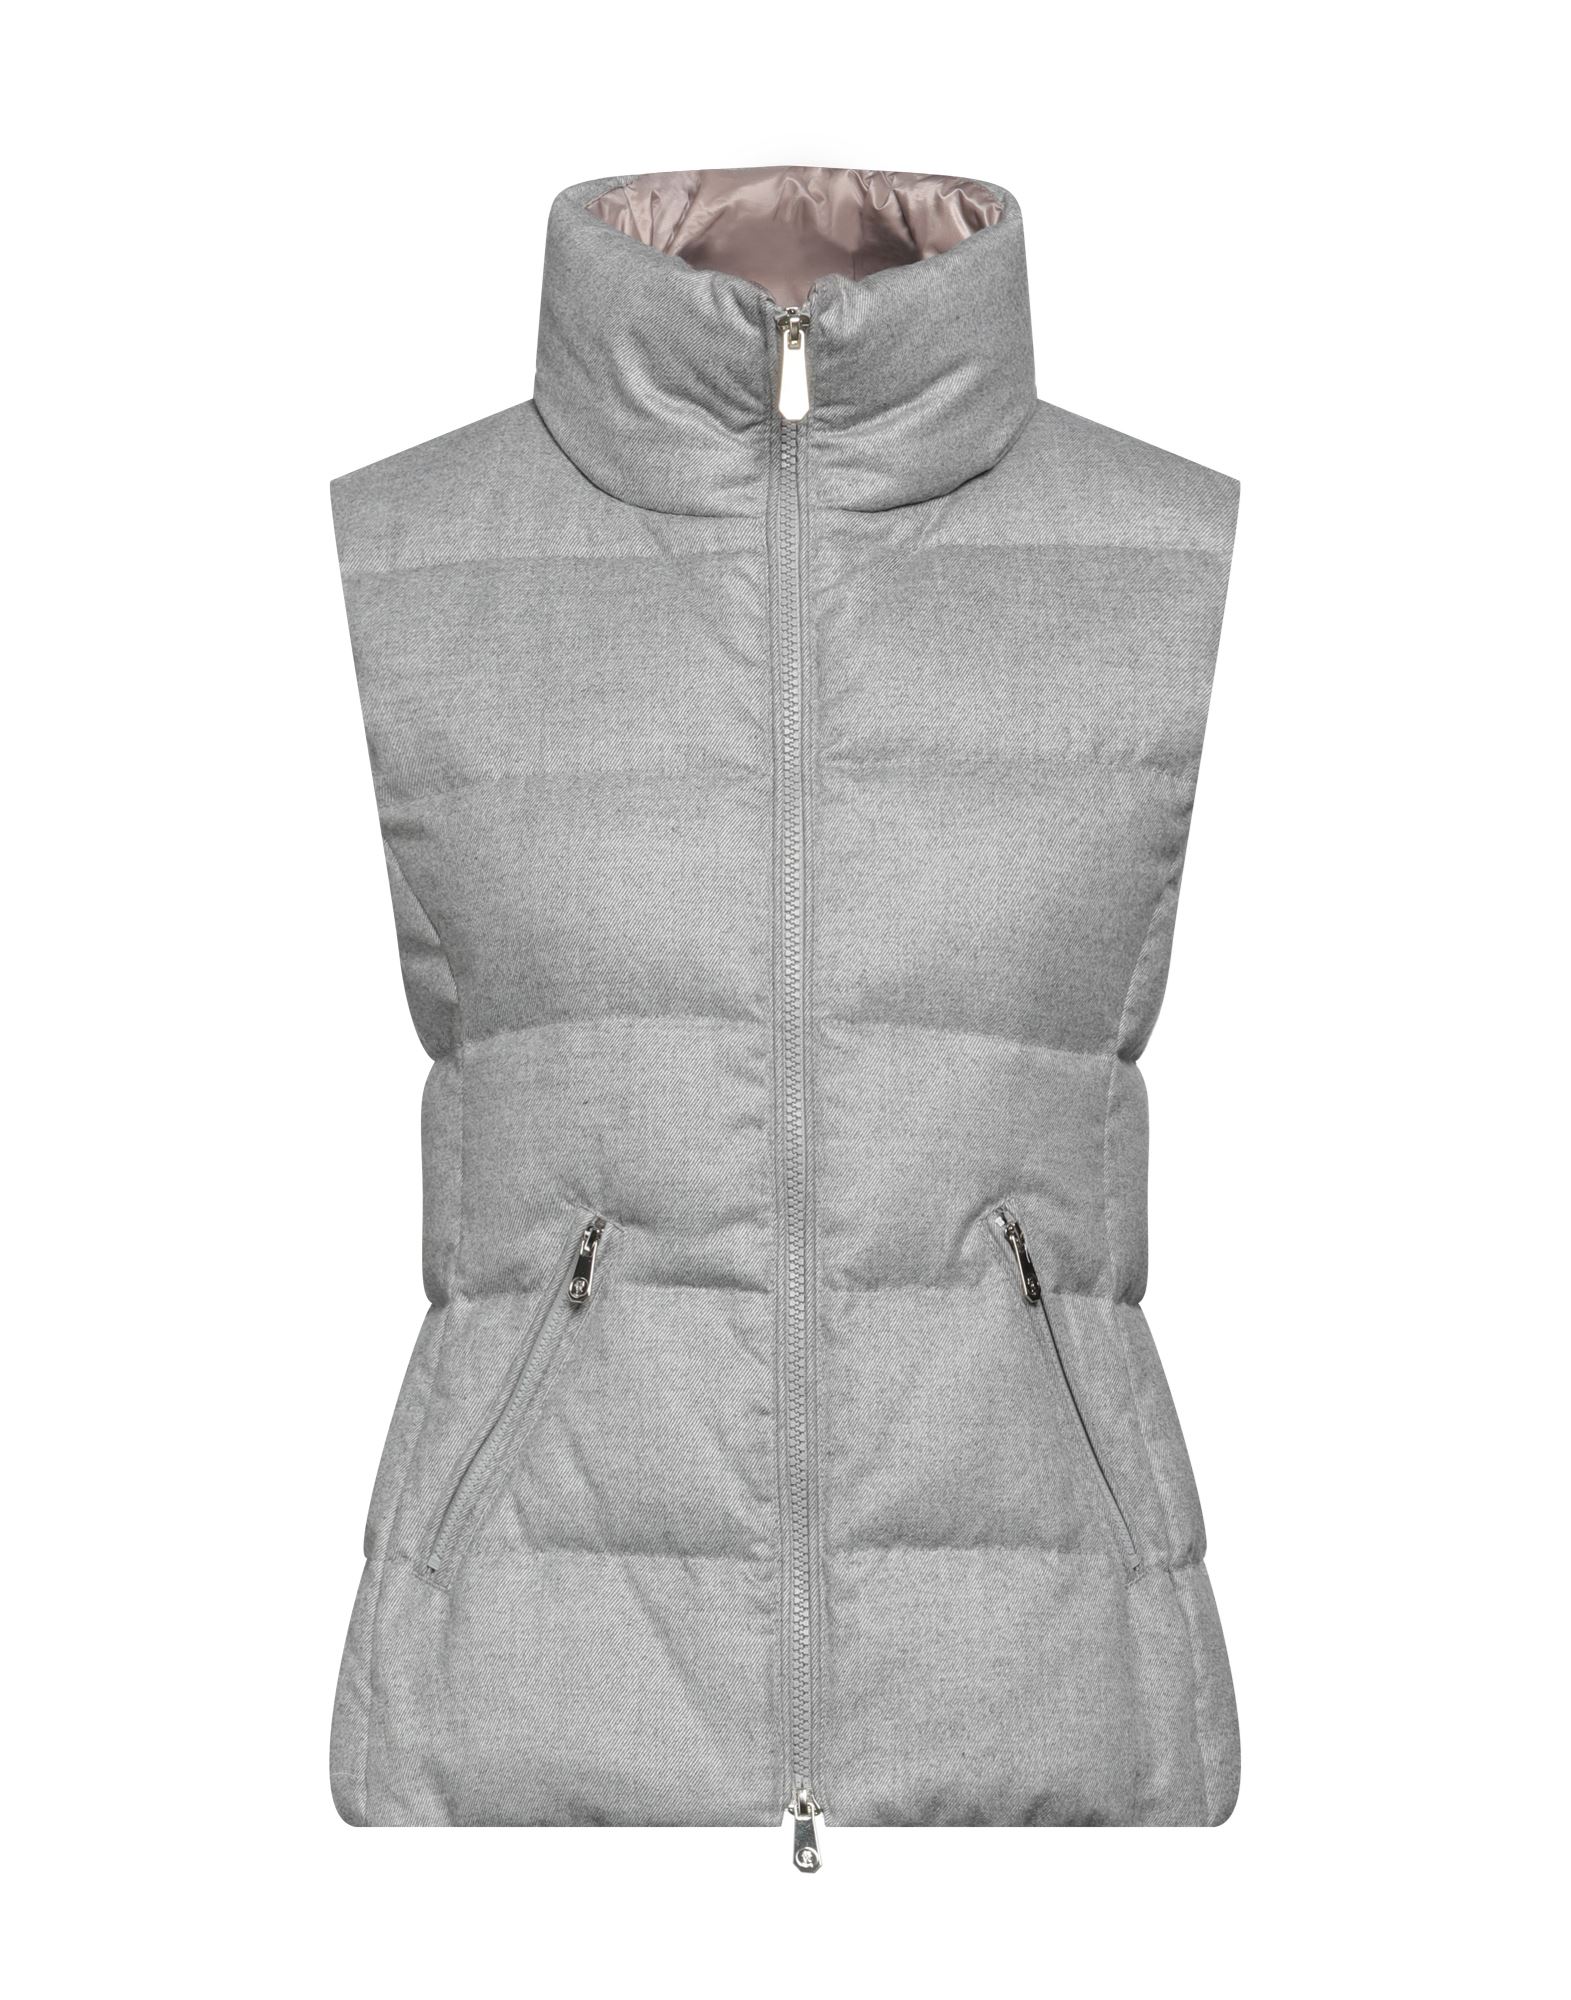 Accuà By Psr Down Jackets In Grey